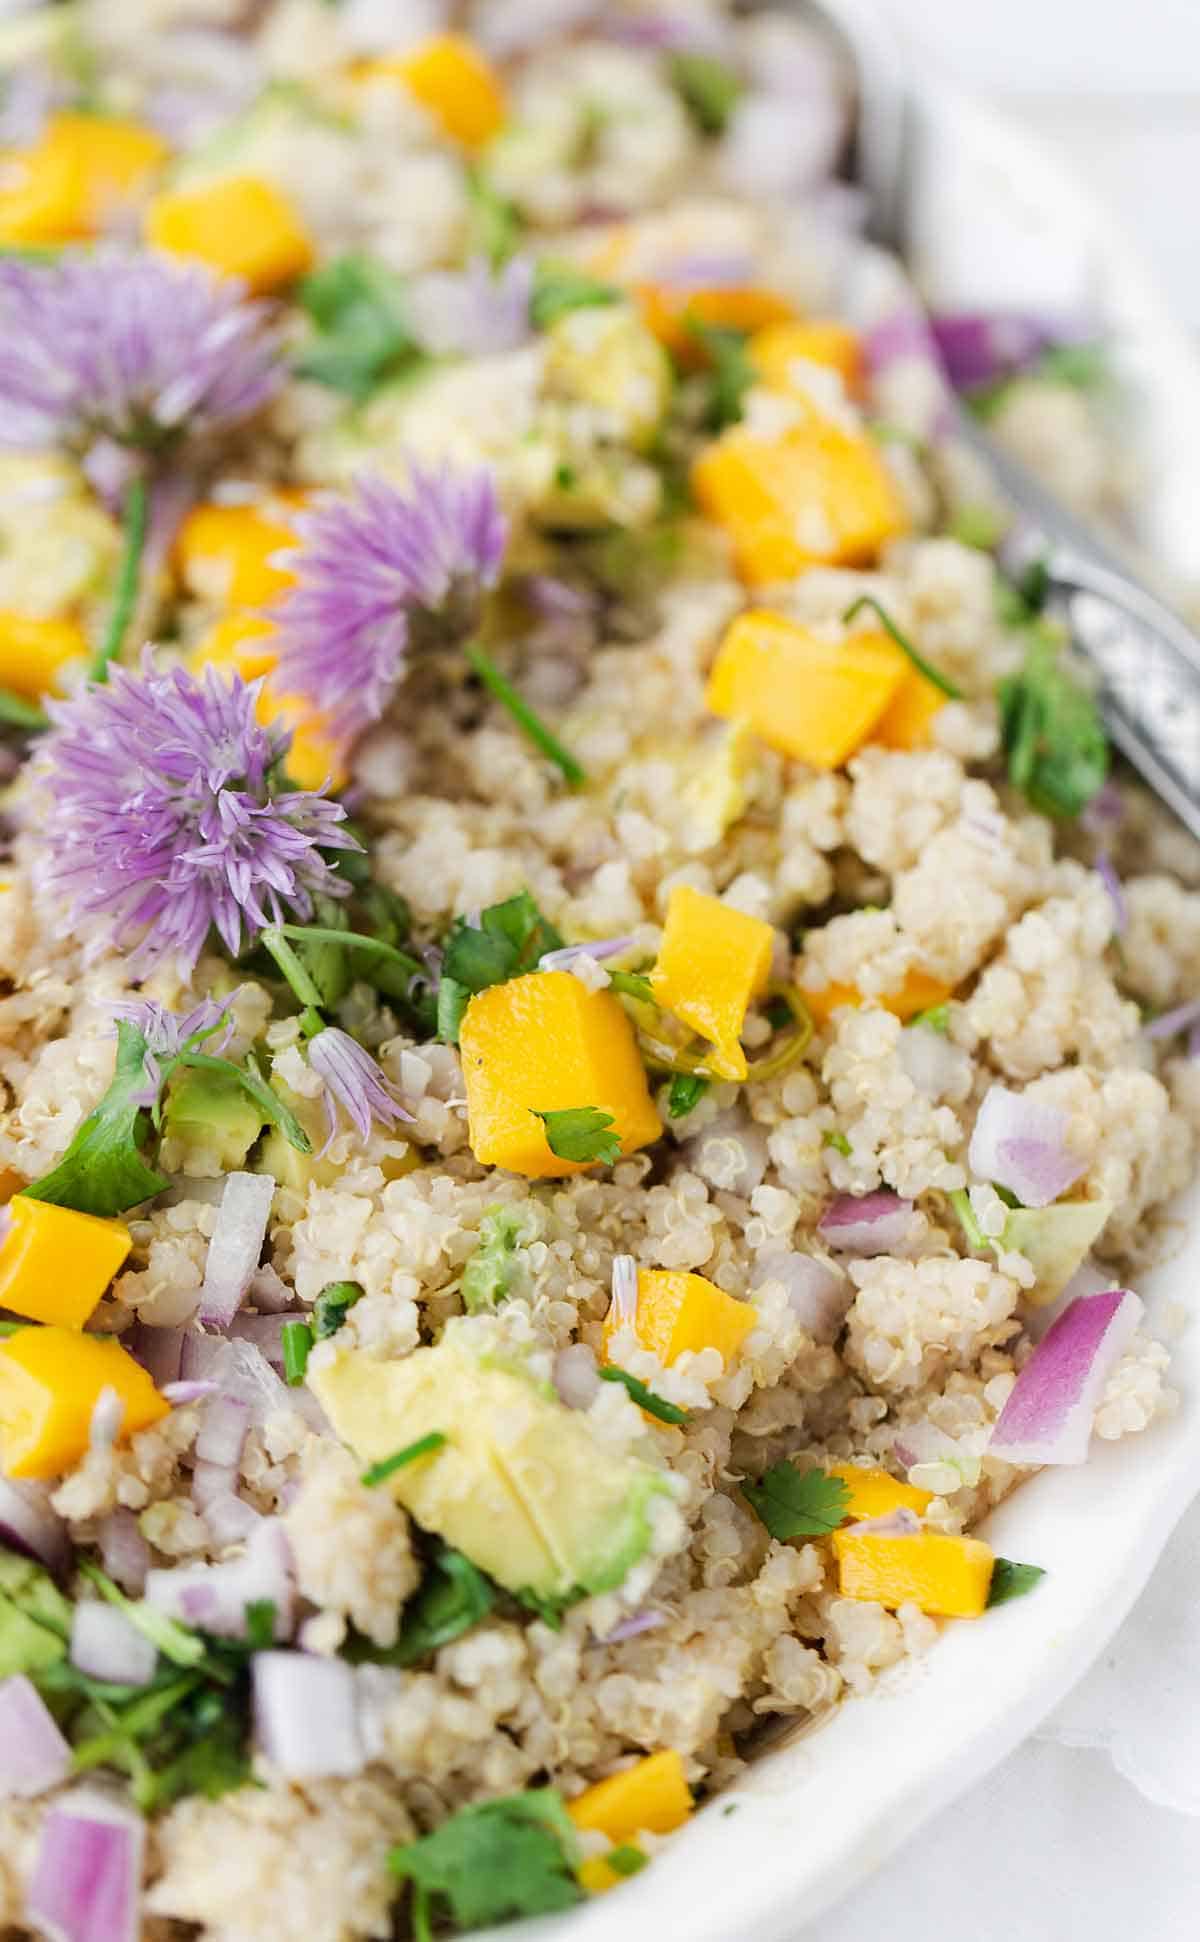 A platter of quinoa salad with mango pieces and purple chive blossoms on a white background.